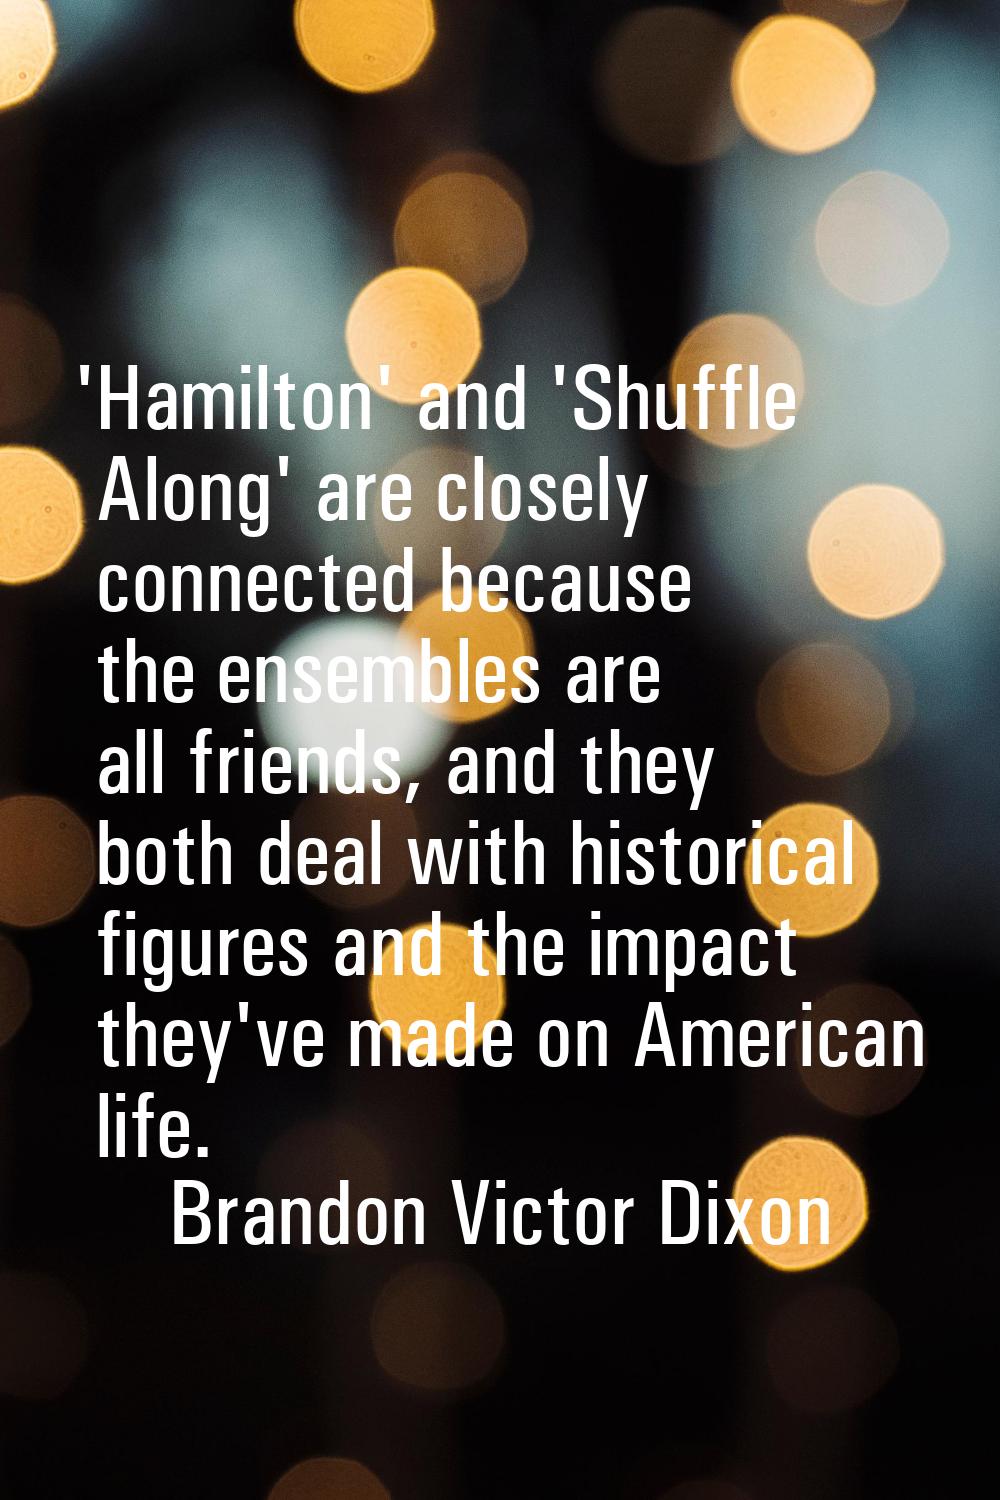 'Hamilton' and 'Shuffle Along' are closely connected because the ensembles are all friends, and the